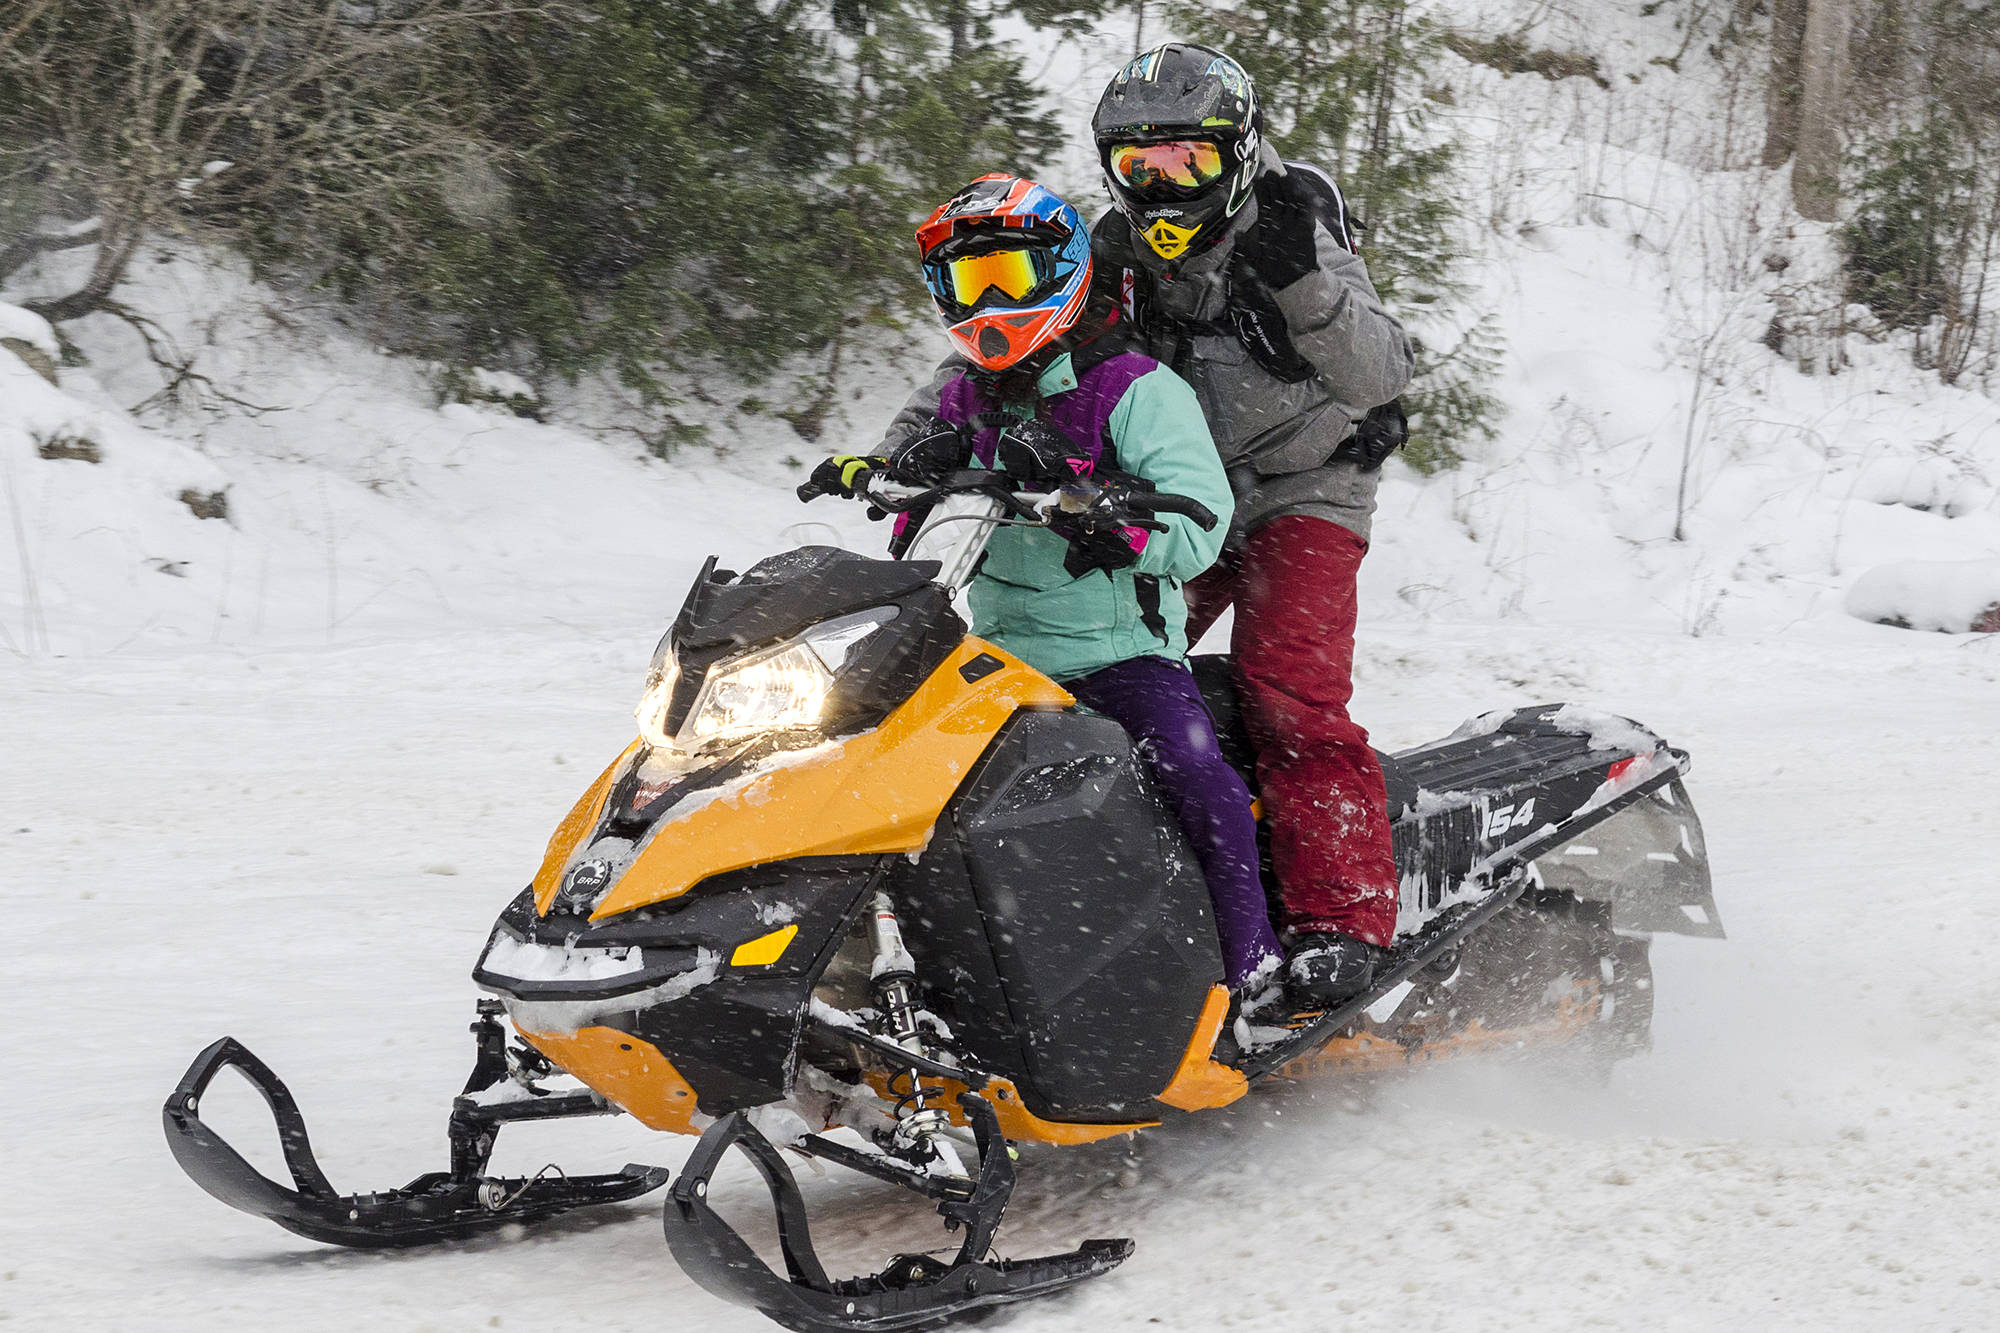 A sledder drives while their passenger waves during a previous snowmobile season in Sicamous. (File photo)